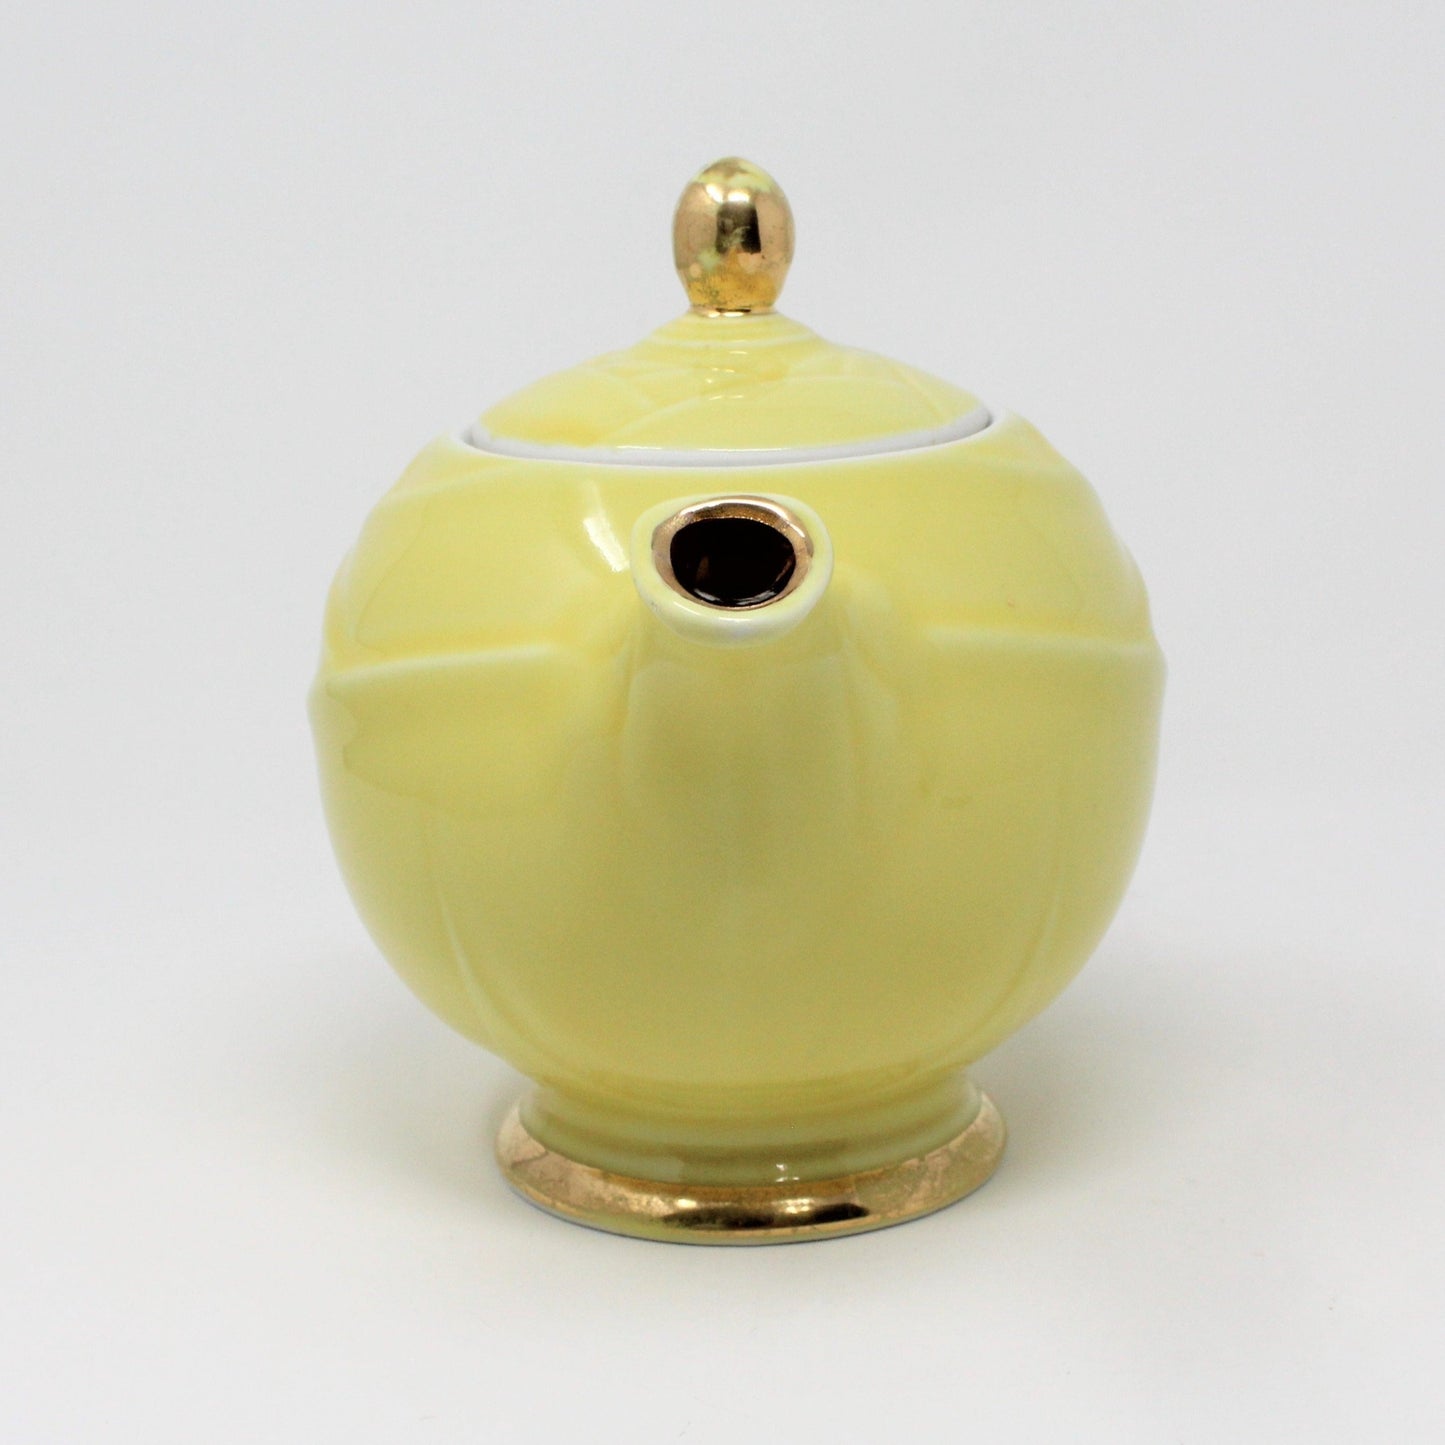 Teapot, Hall Pottery, Moderne in Canary Yellow, Vintage